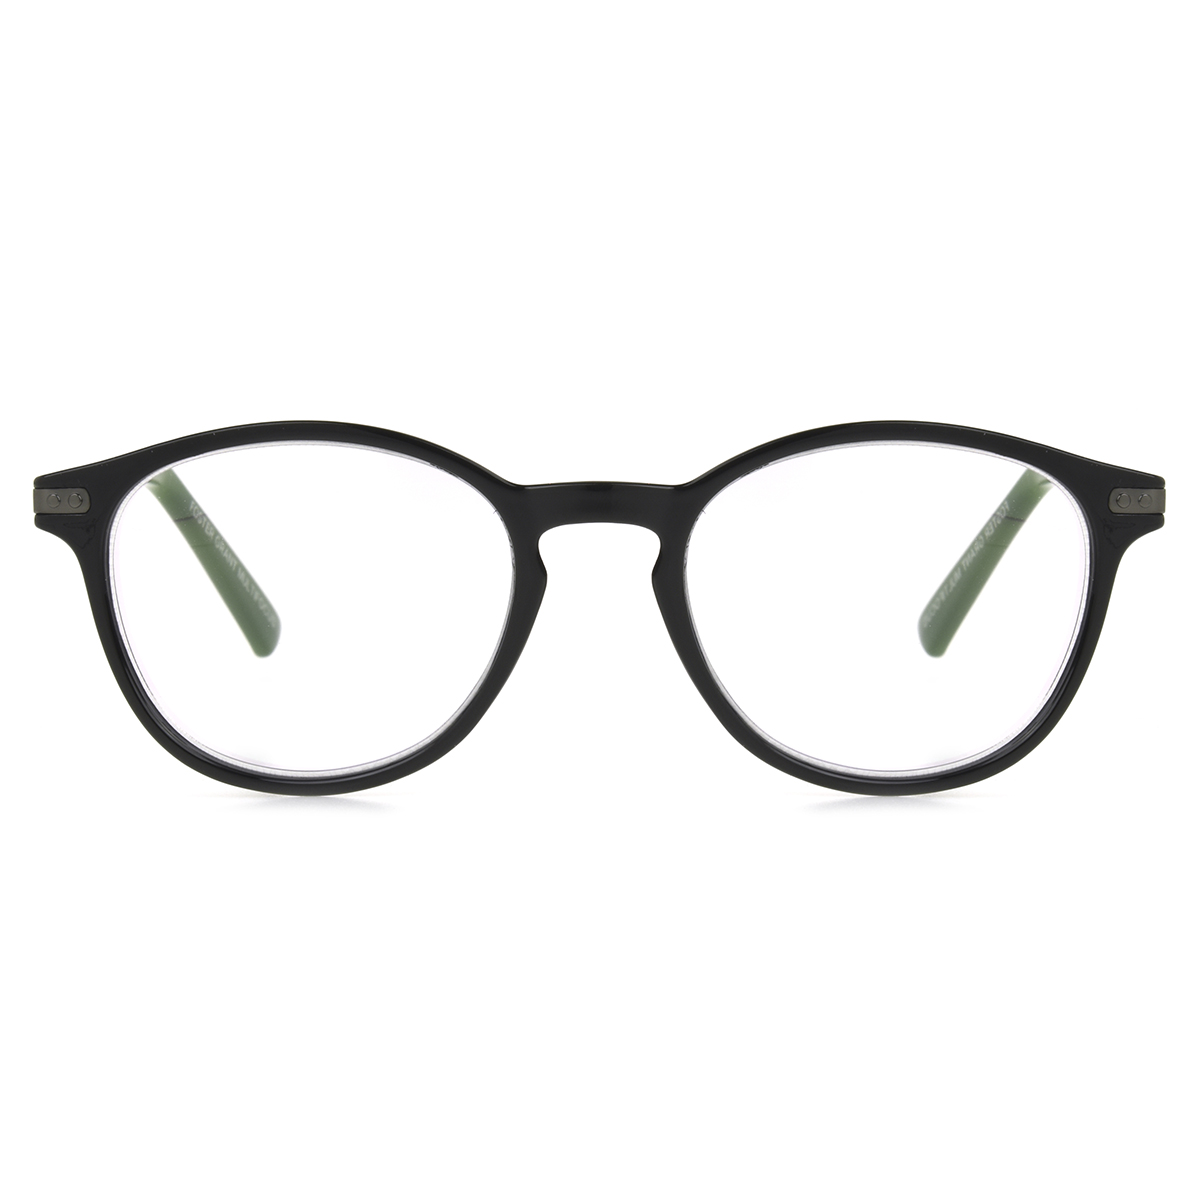 Unisex Round Reading Glasses In Black By Foster Grant - McKay - +1.25